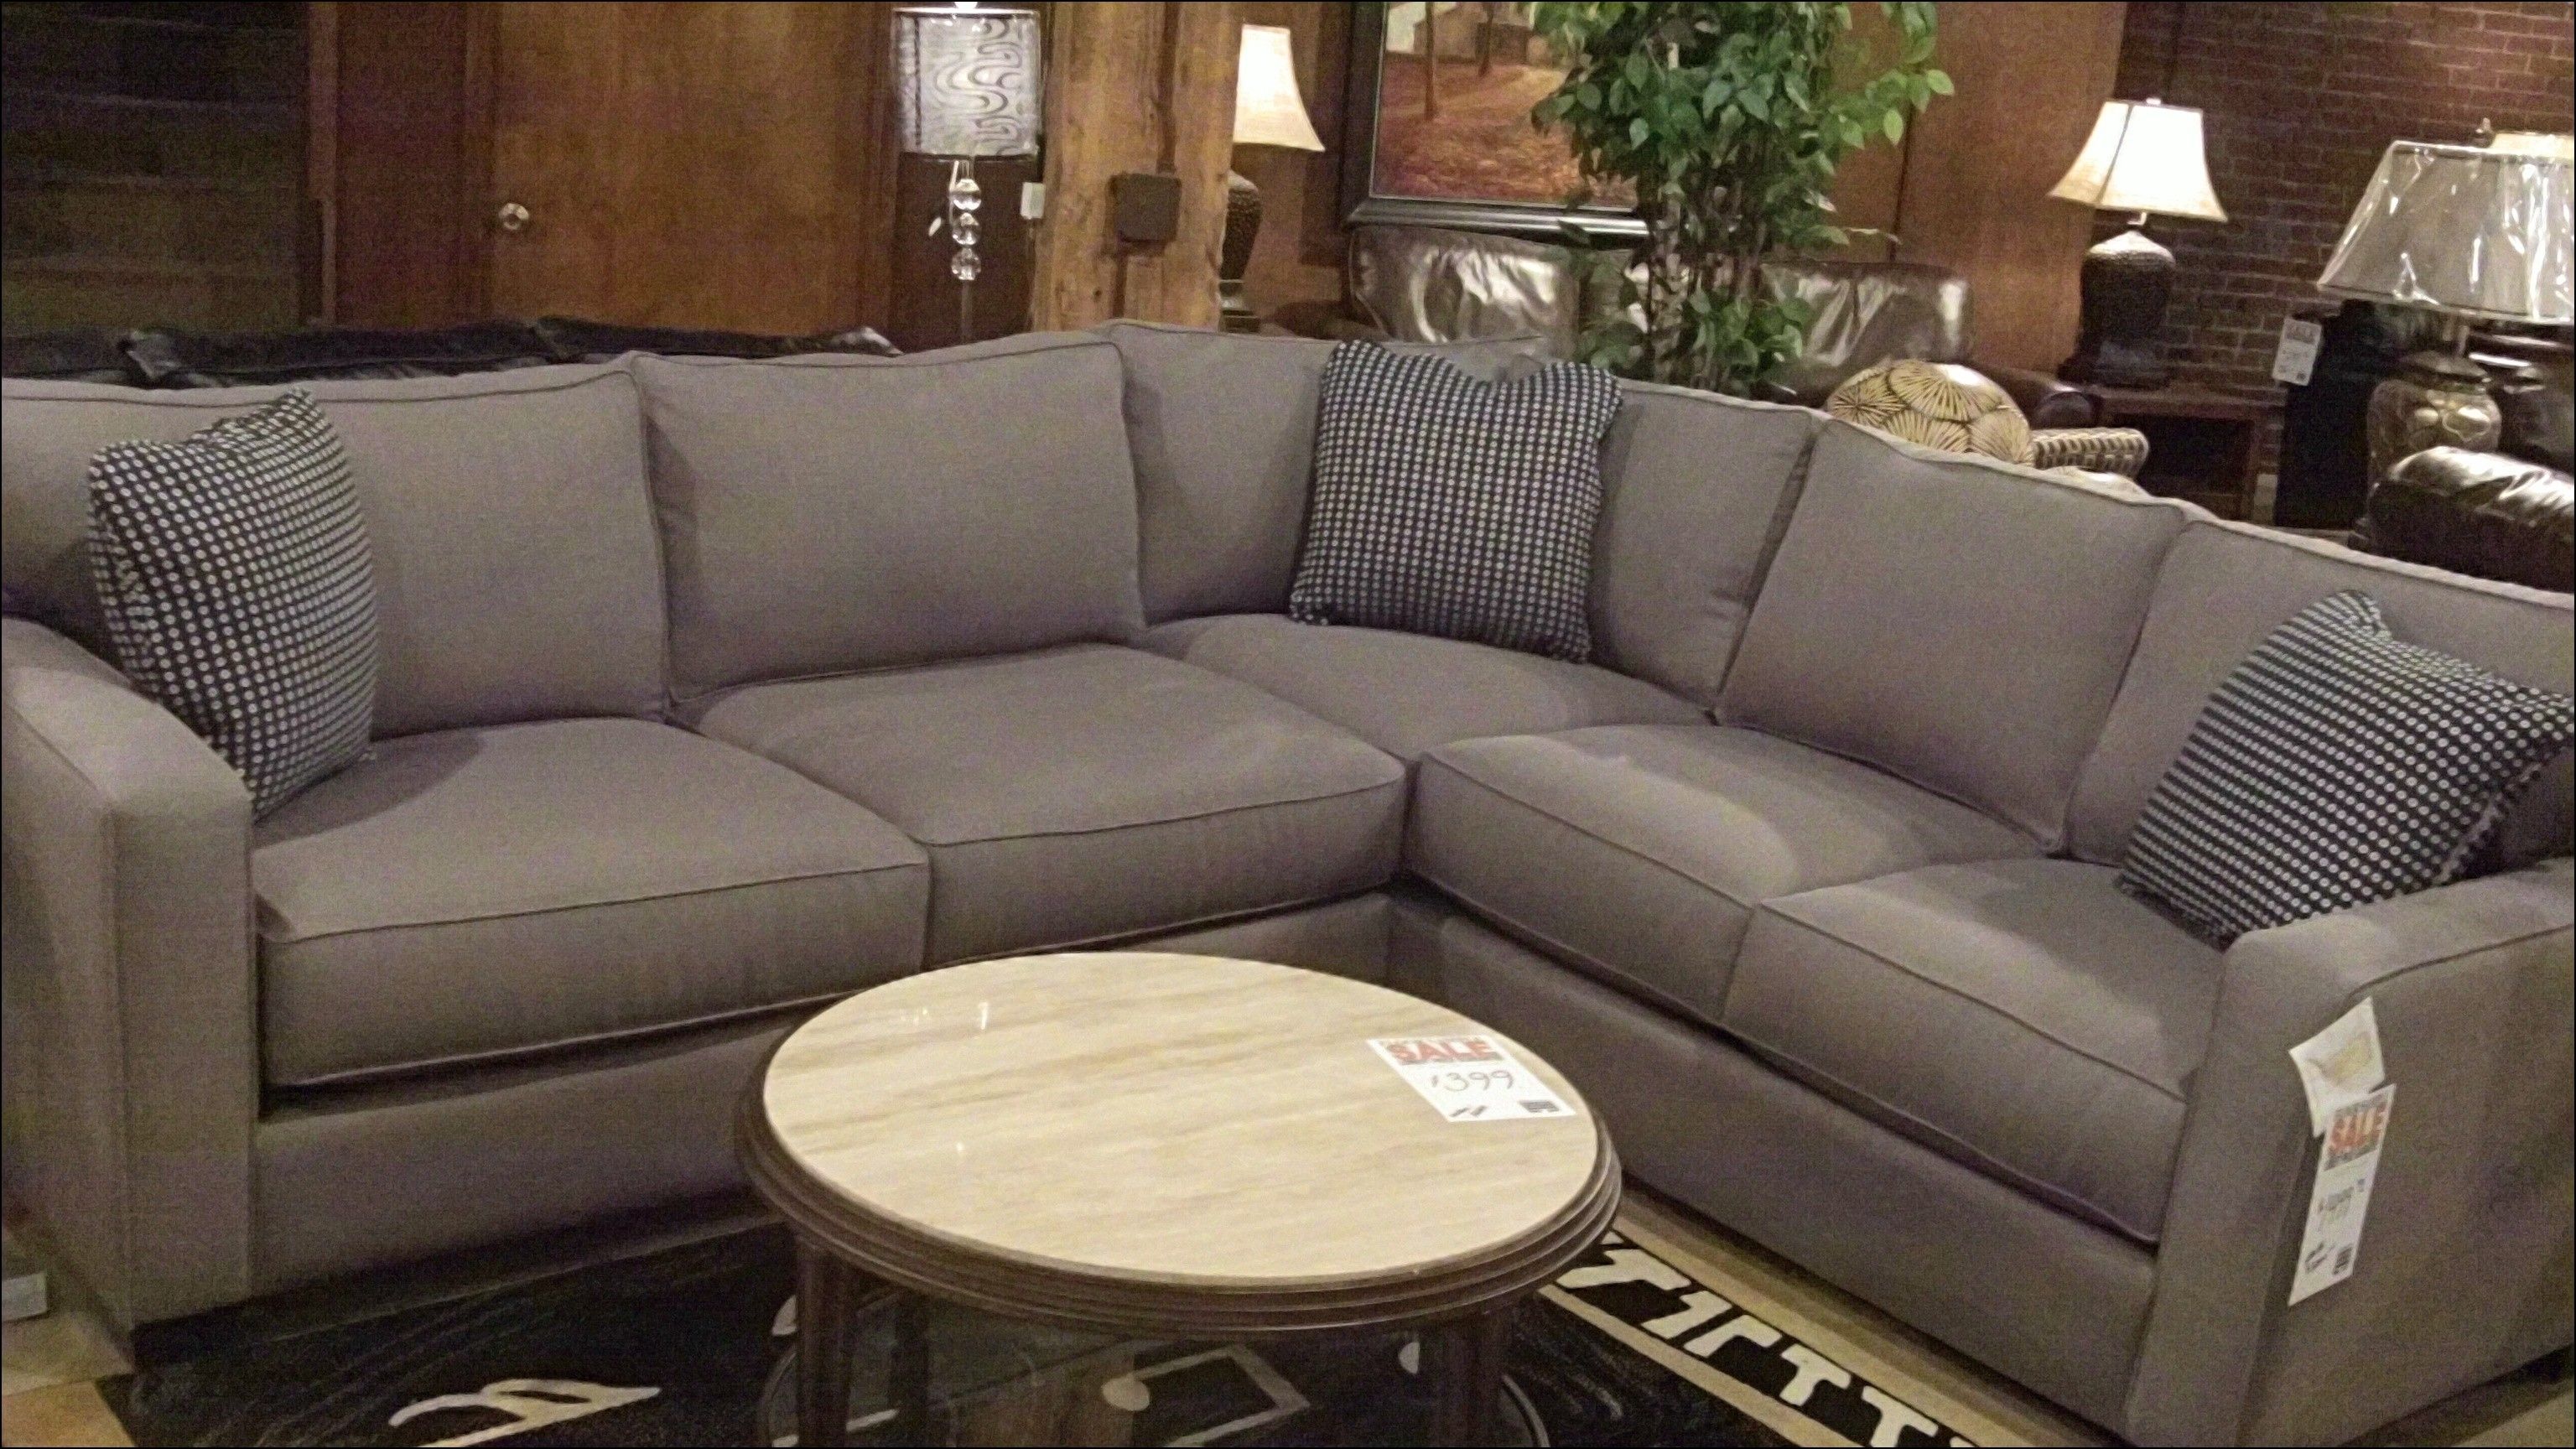 Stylish Sectional Sofas Tulsa Ok – Buildsimplehome In Tulsa Sectional Sofas (View 2 of 10)